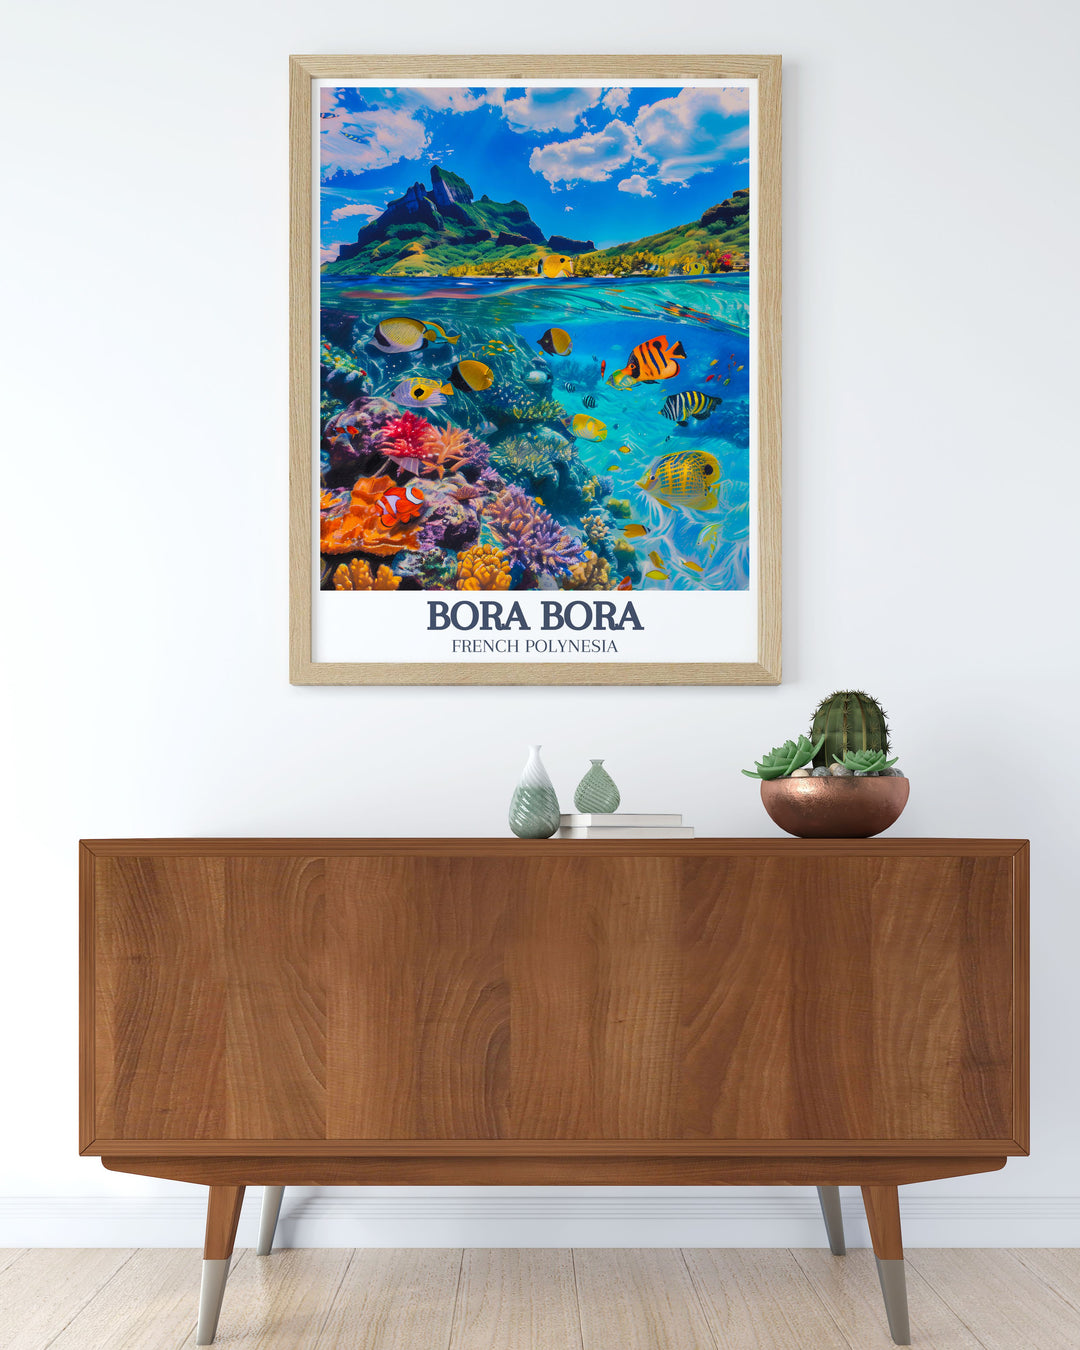 Bora Bora Lagoon Coral Gardens wall art brings the tranquility of Bora Bora into your living space featuring detailed depictions of vibrant underwater worlds this travel print is perfect for enhancing the ambiance of any room with its serene and picturesque scenery.